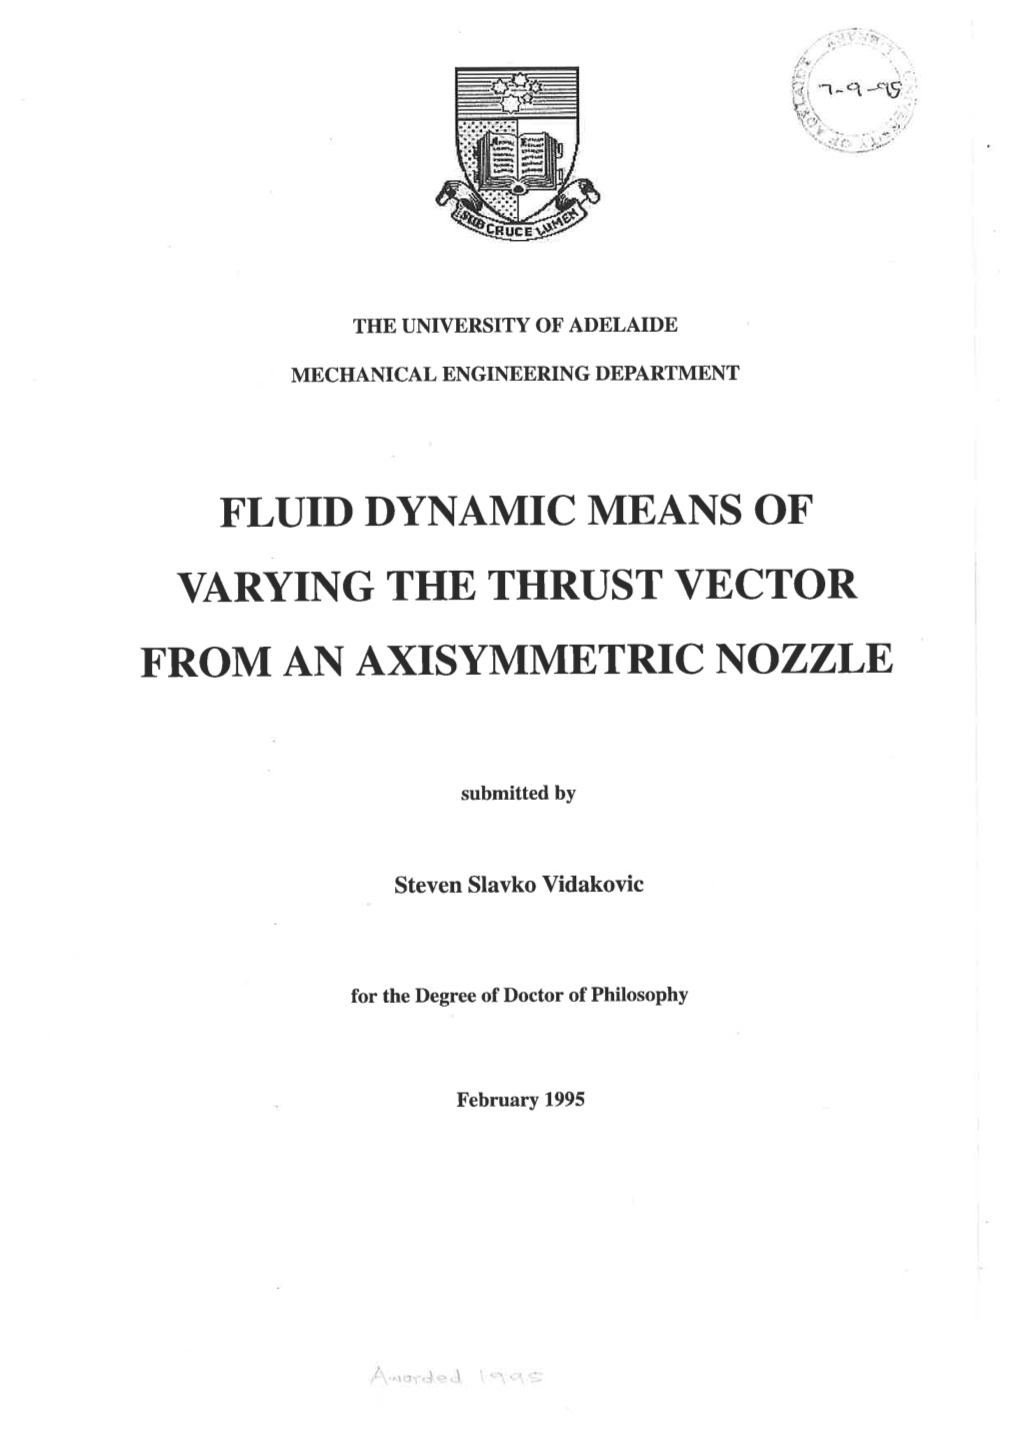 Fluid Dynamic Means of Varying the Thrust Vector from an Axisymmetric Nozzle